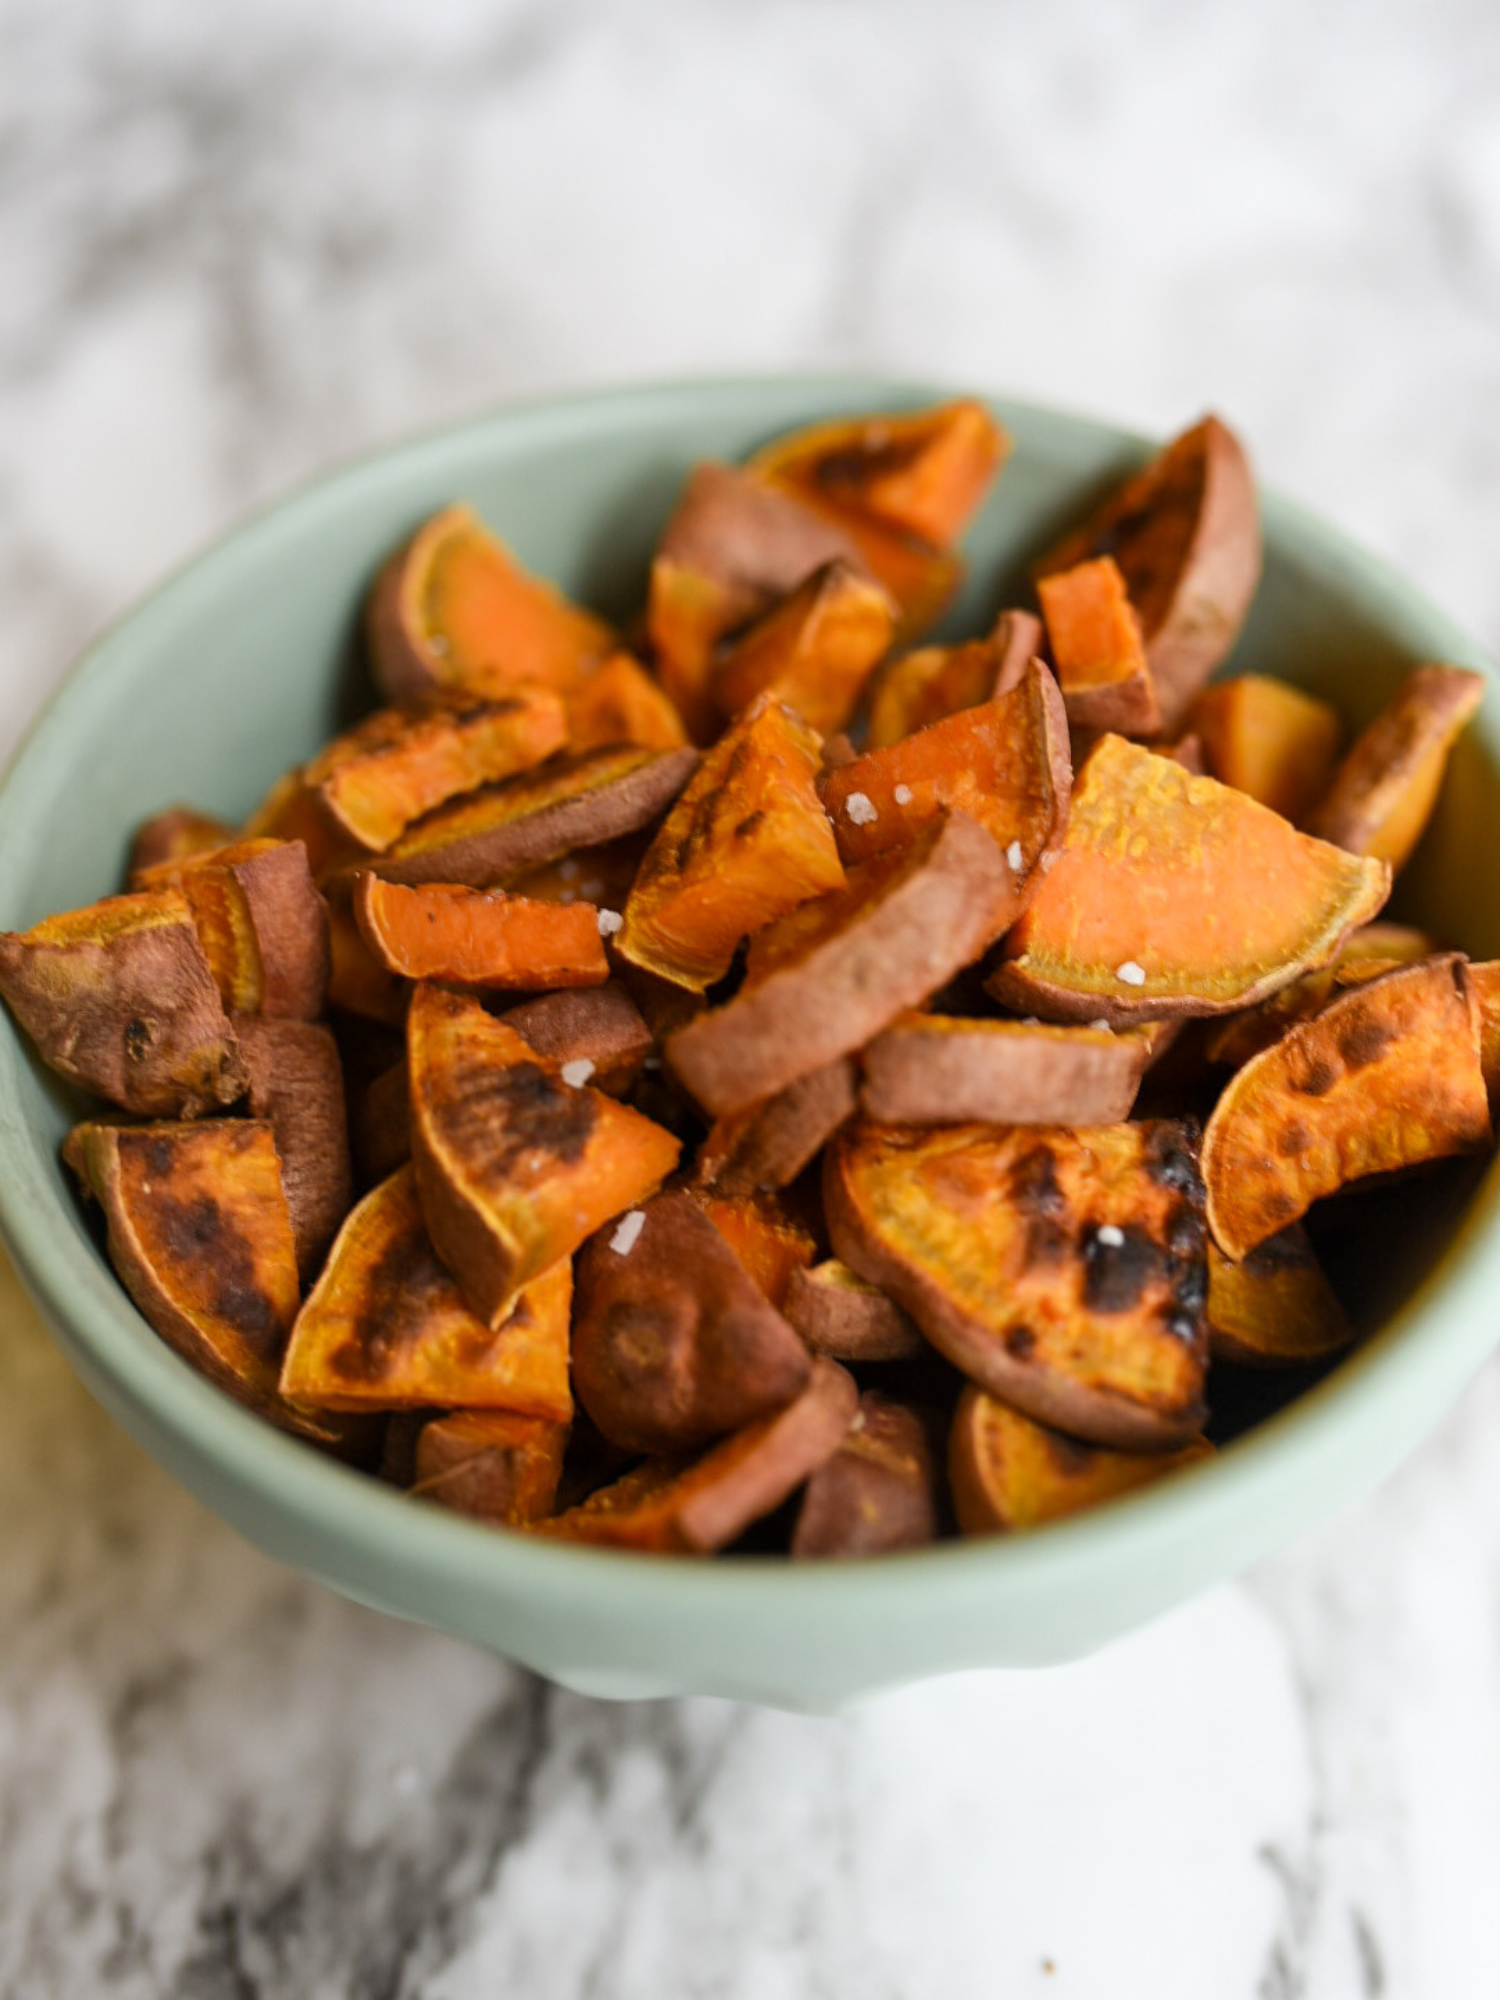 Oil Free Roasted Sweet Potatoes in a blue bowl on a marble countertop